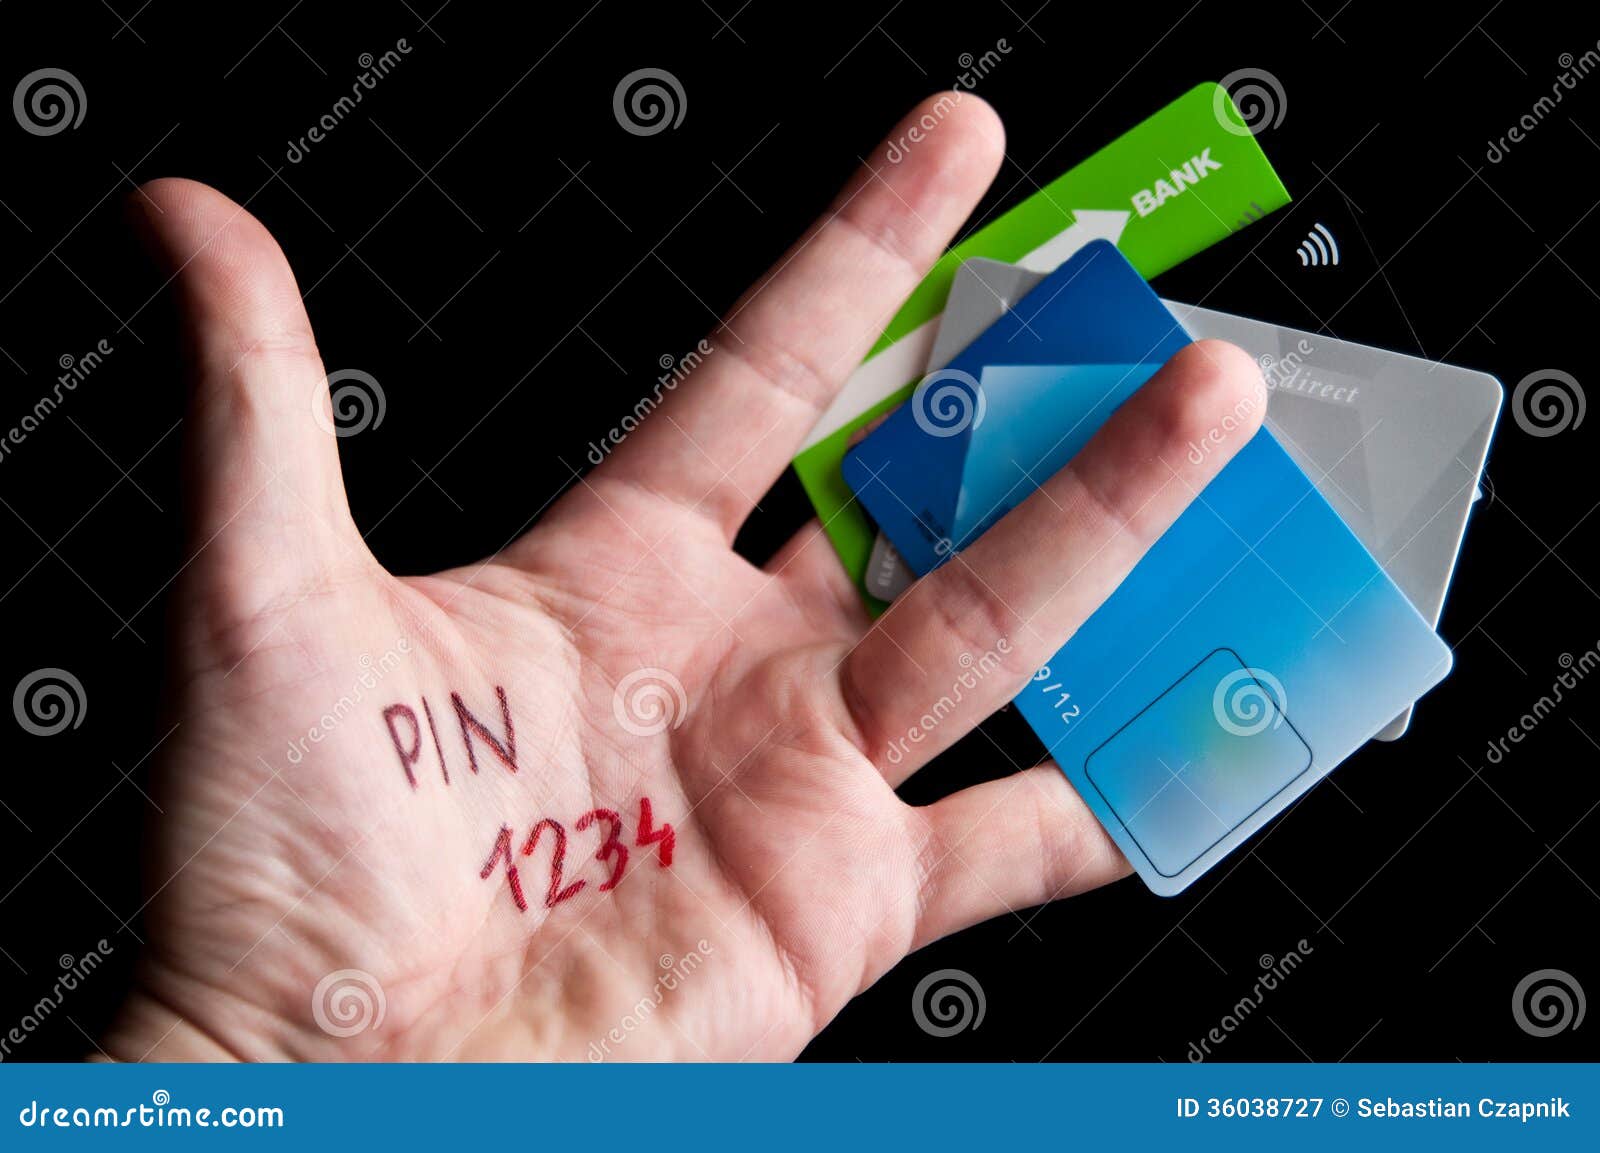 Logisch Stun In detail Credit card pin stock image. Image of easily, identification - 36038727